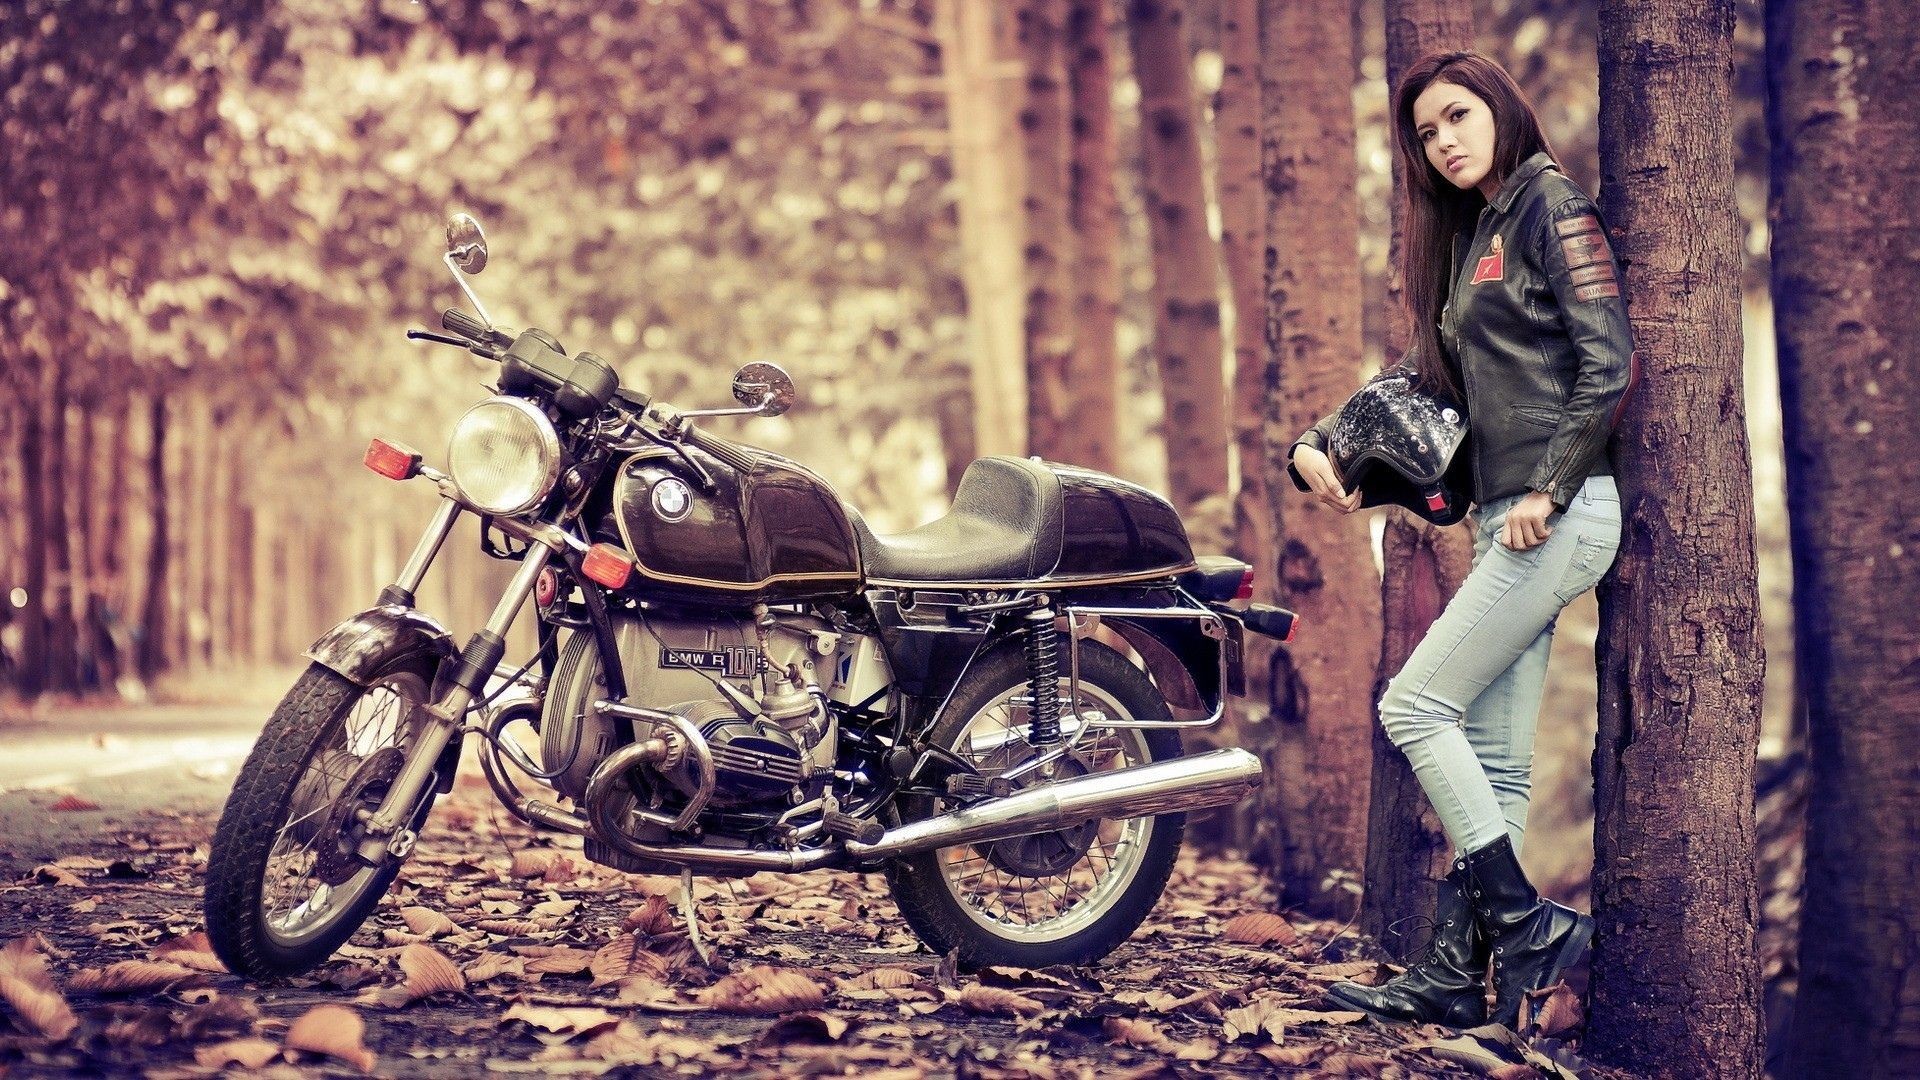 1920x1080, Asian Girls Hd Wallpapers And Backgrounds - Girl And Bike Wallpapers Hd Download - HD Wallpaper 